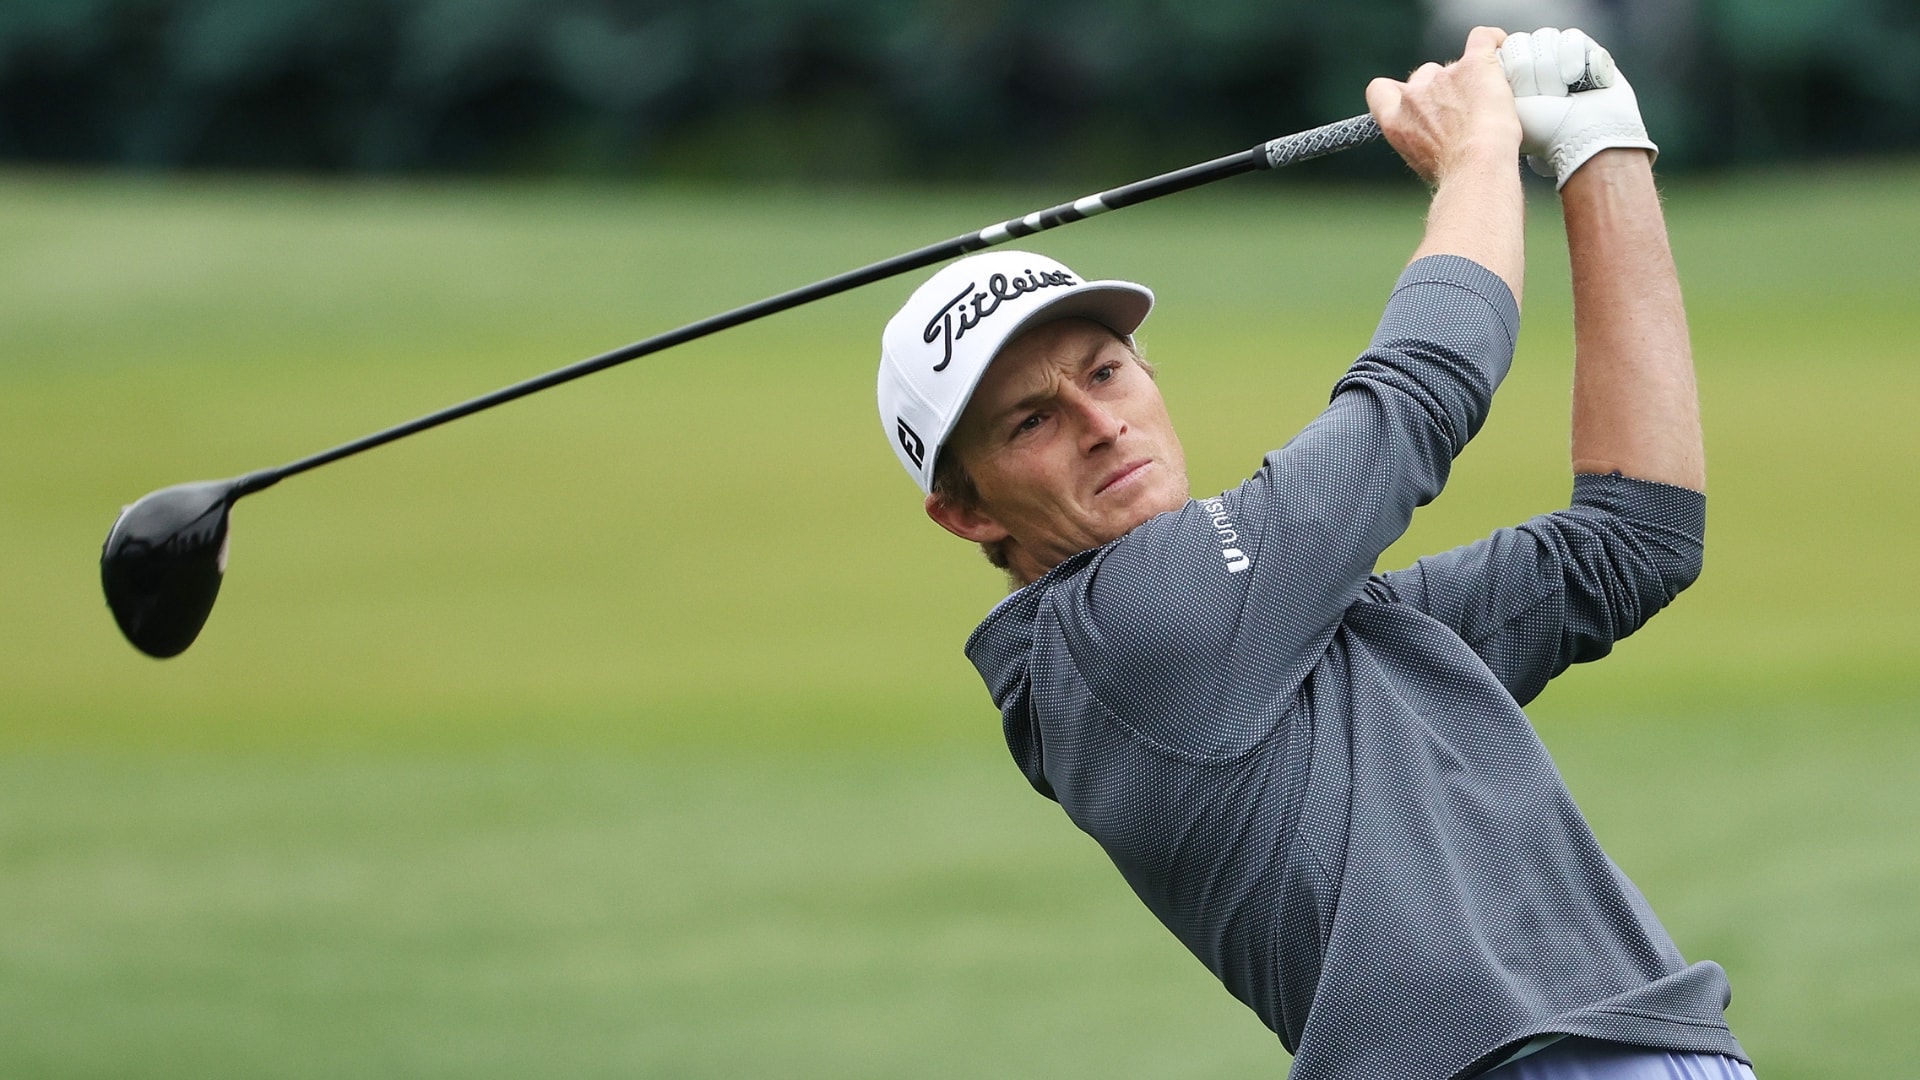 Will Zalatoris out for season after withdrawing from Masters, undergoing surgery